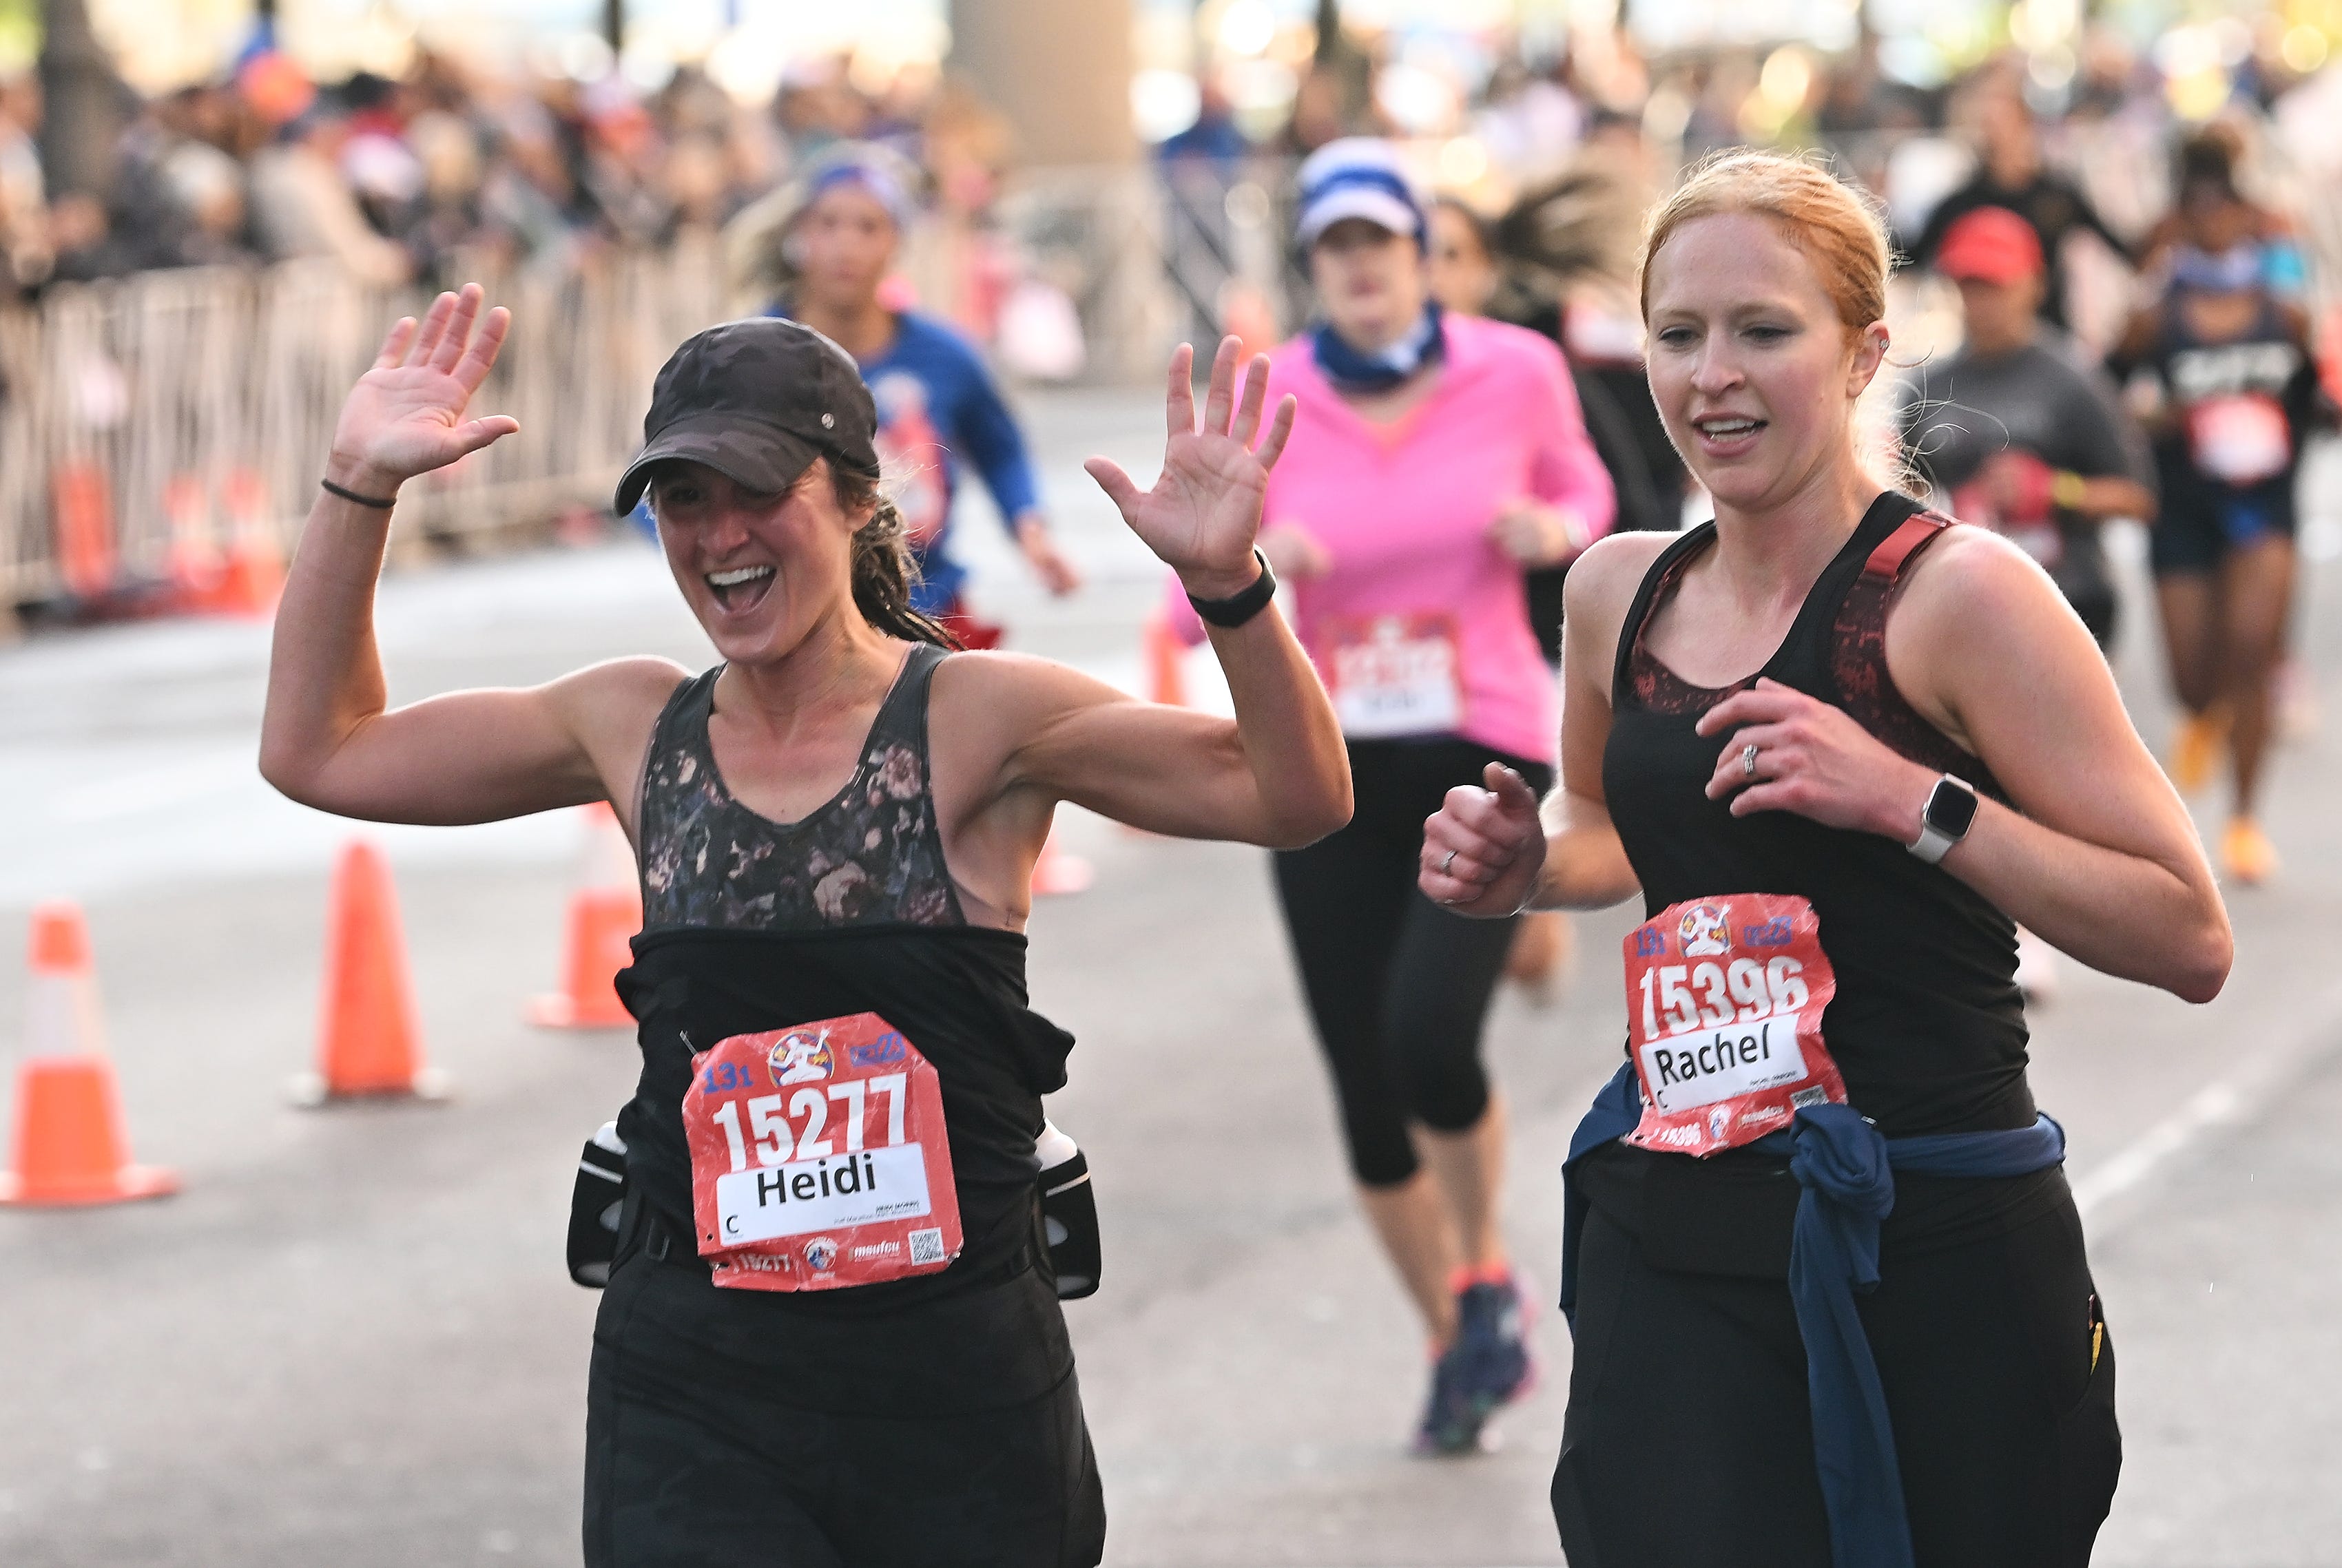 From left, Heidi Morris, 41, and Rachel Friesen, 33, both of Rochester Hills, react as they finish the half marathon.